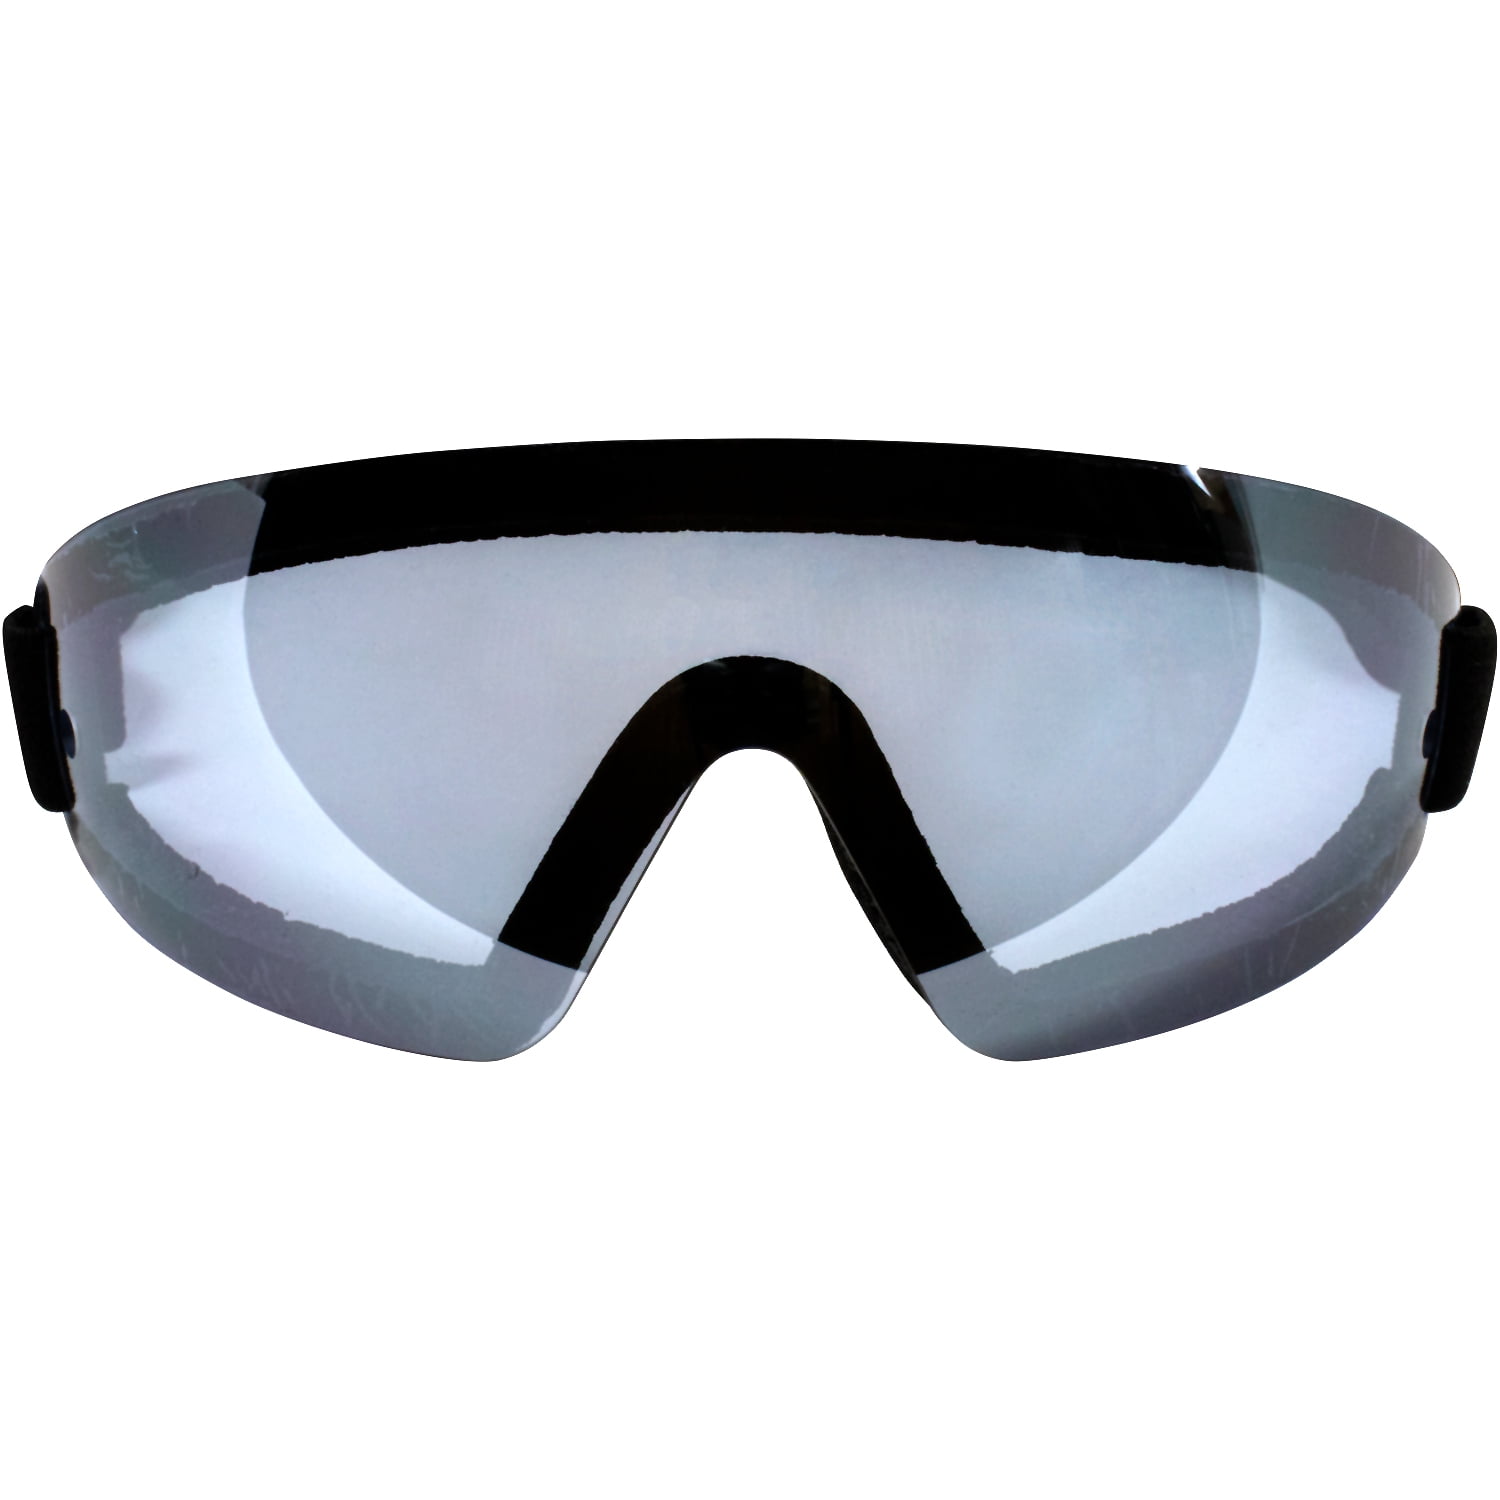 Birdz Wing Face Hugging Riding or Sky Diving Goggles with Smoke Lenses 